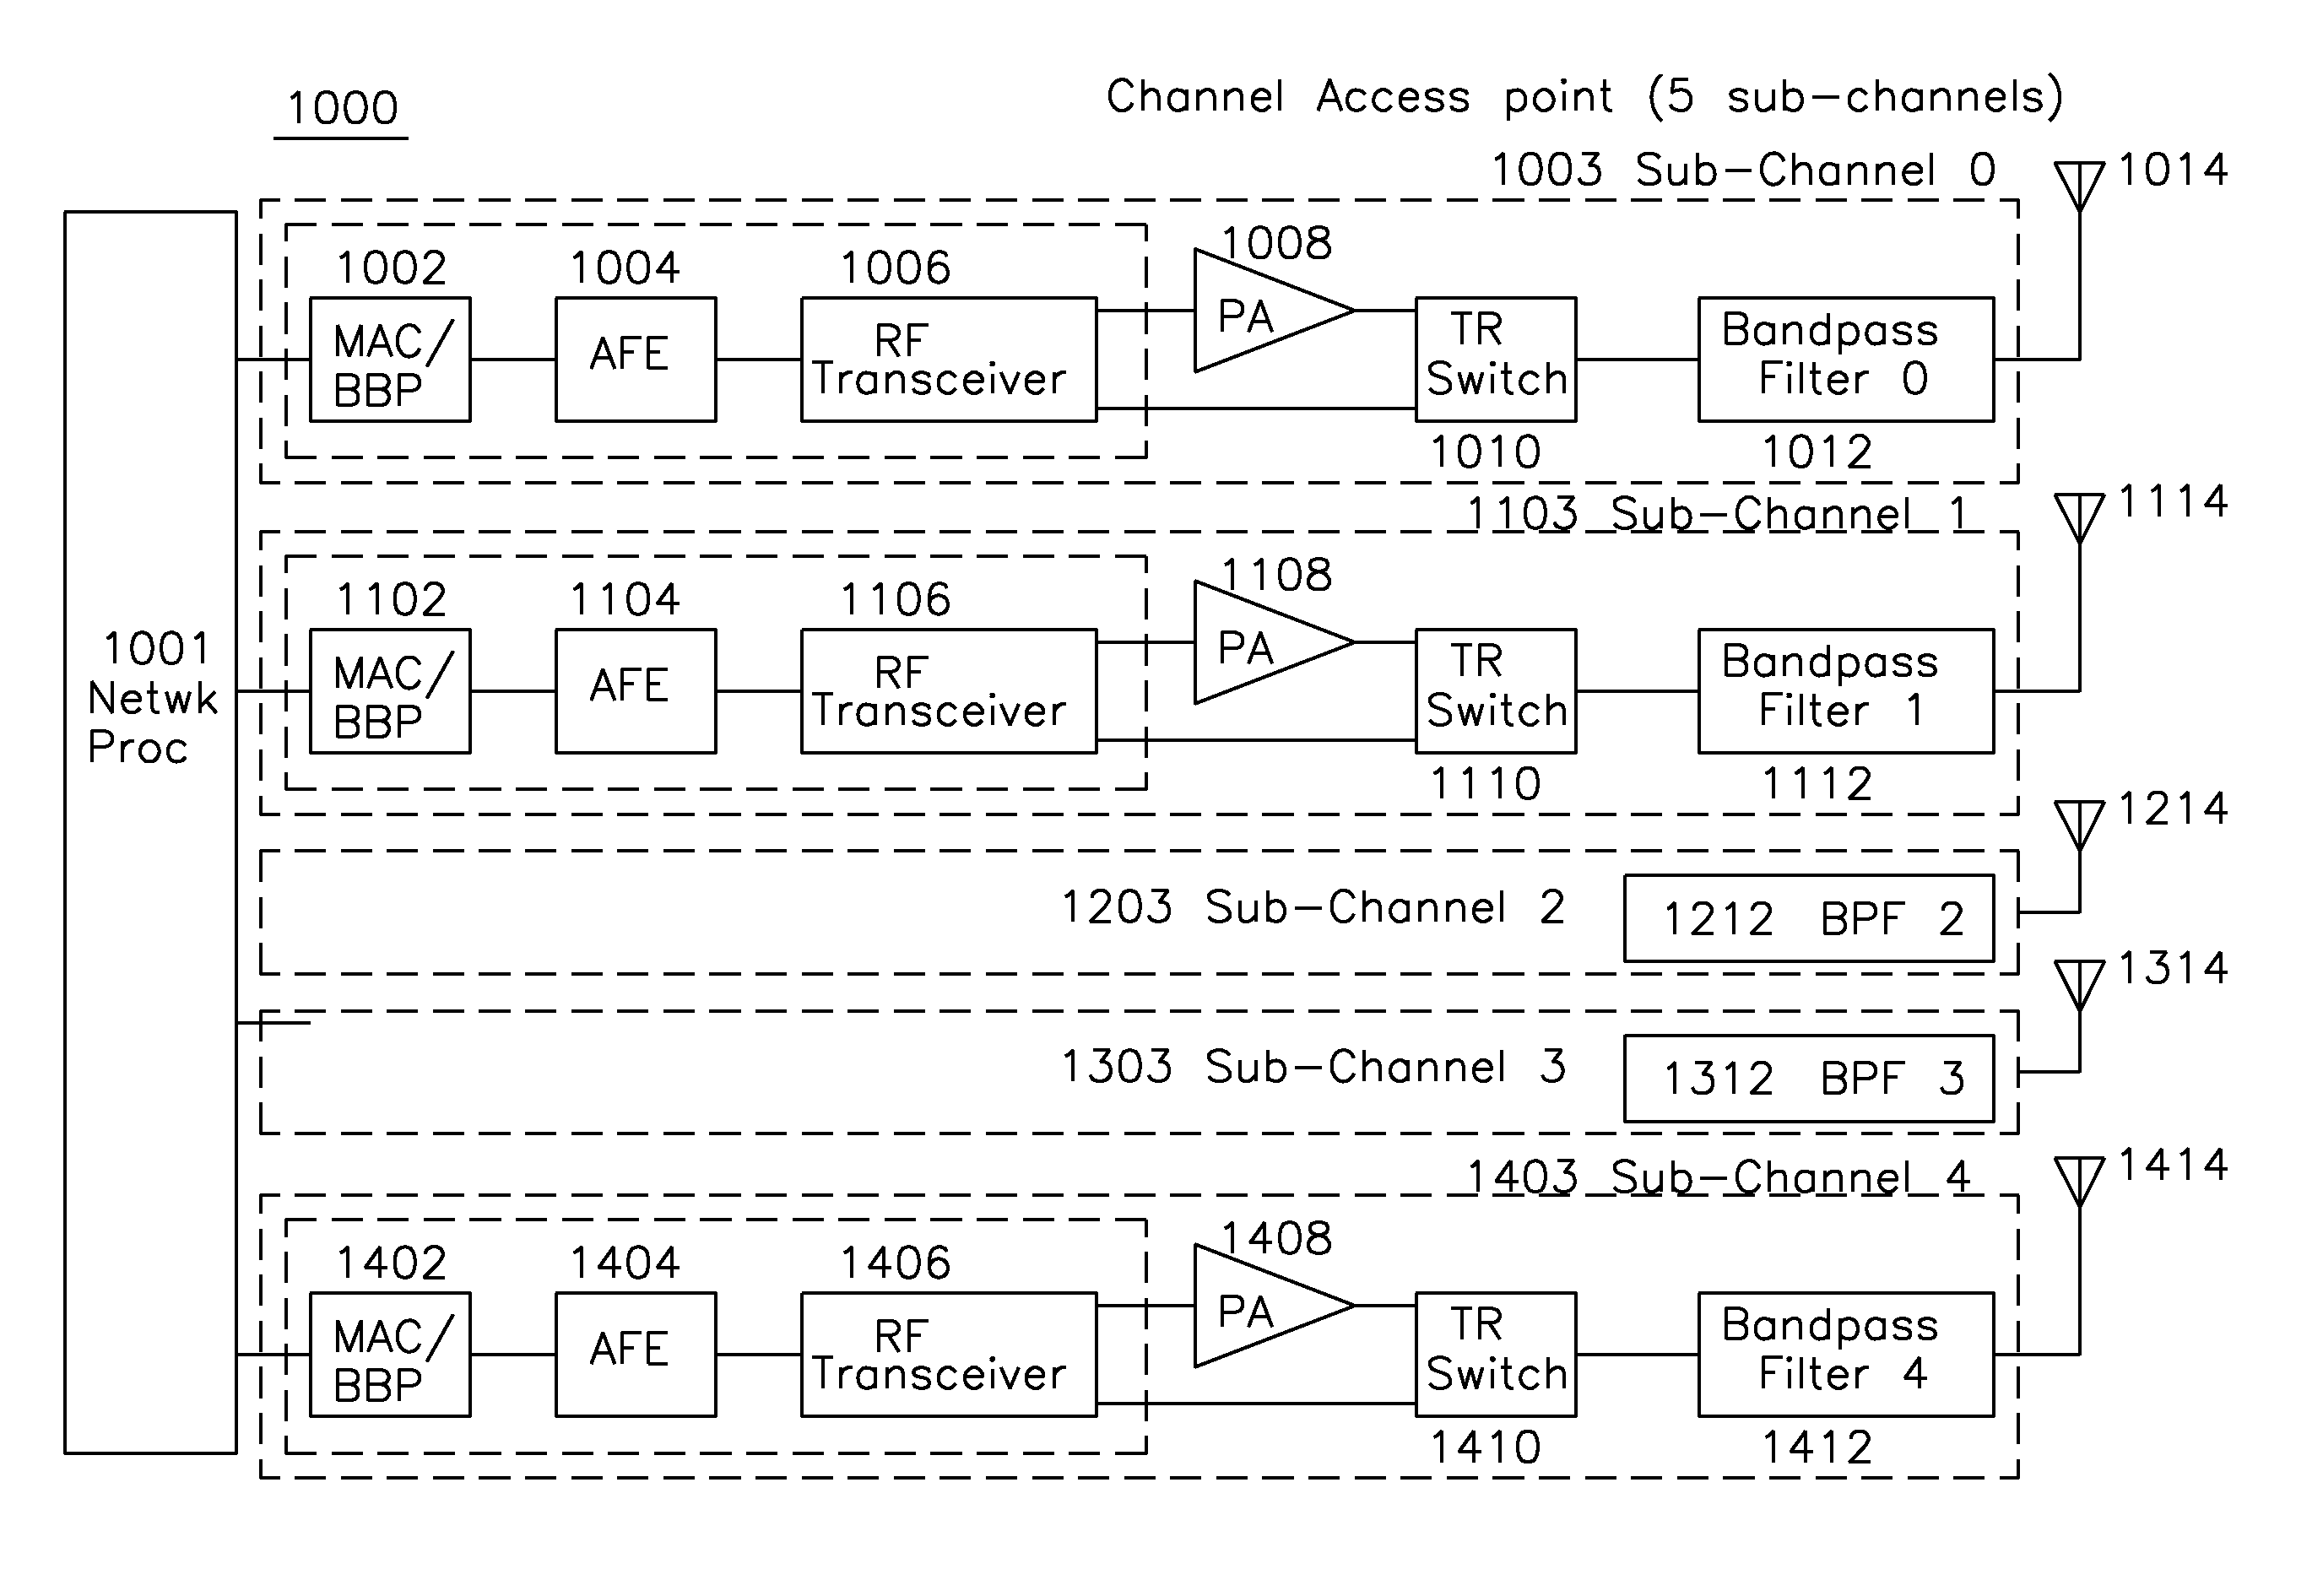 Access point processor for a wireless local area network utilizing multiple sub-channels